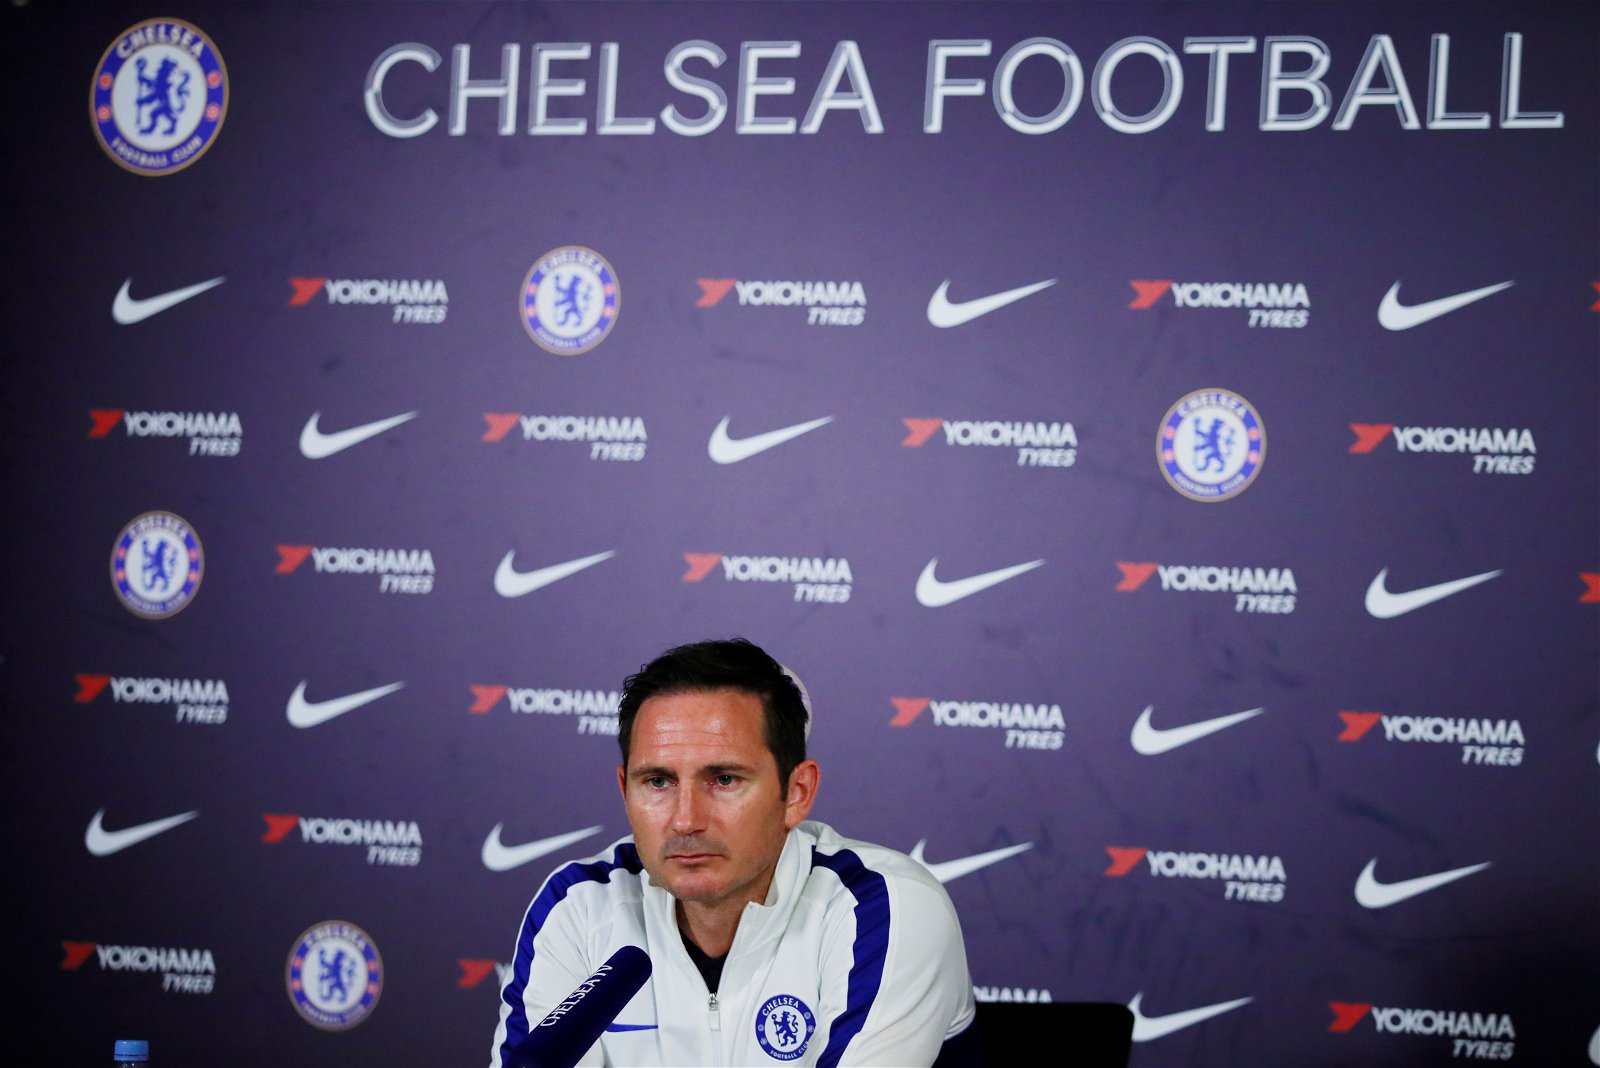 Pep has words of high praise for Lampard